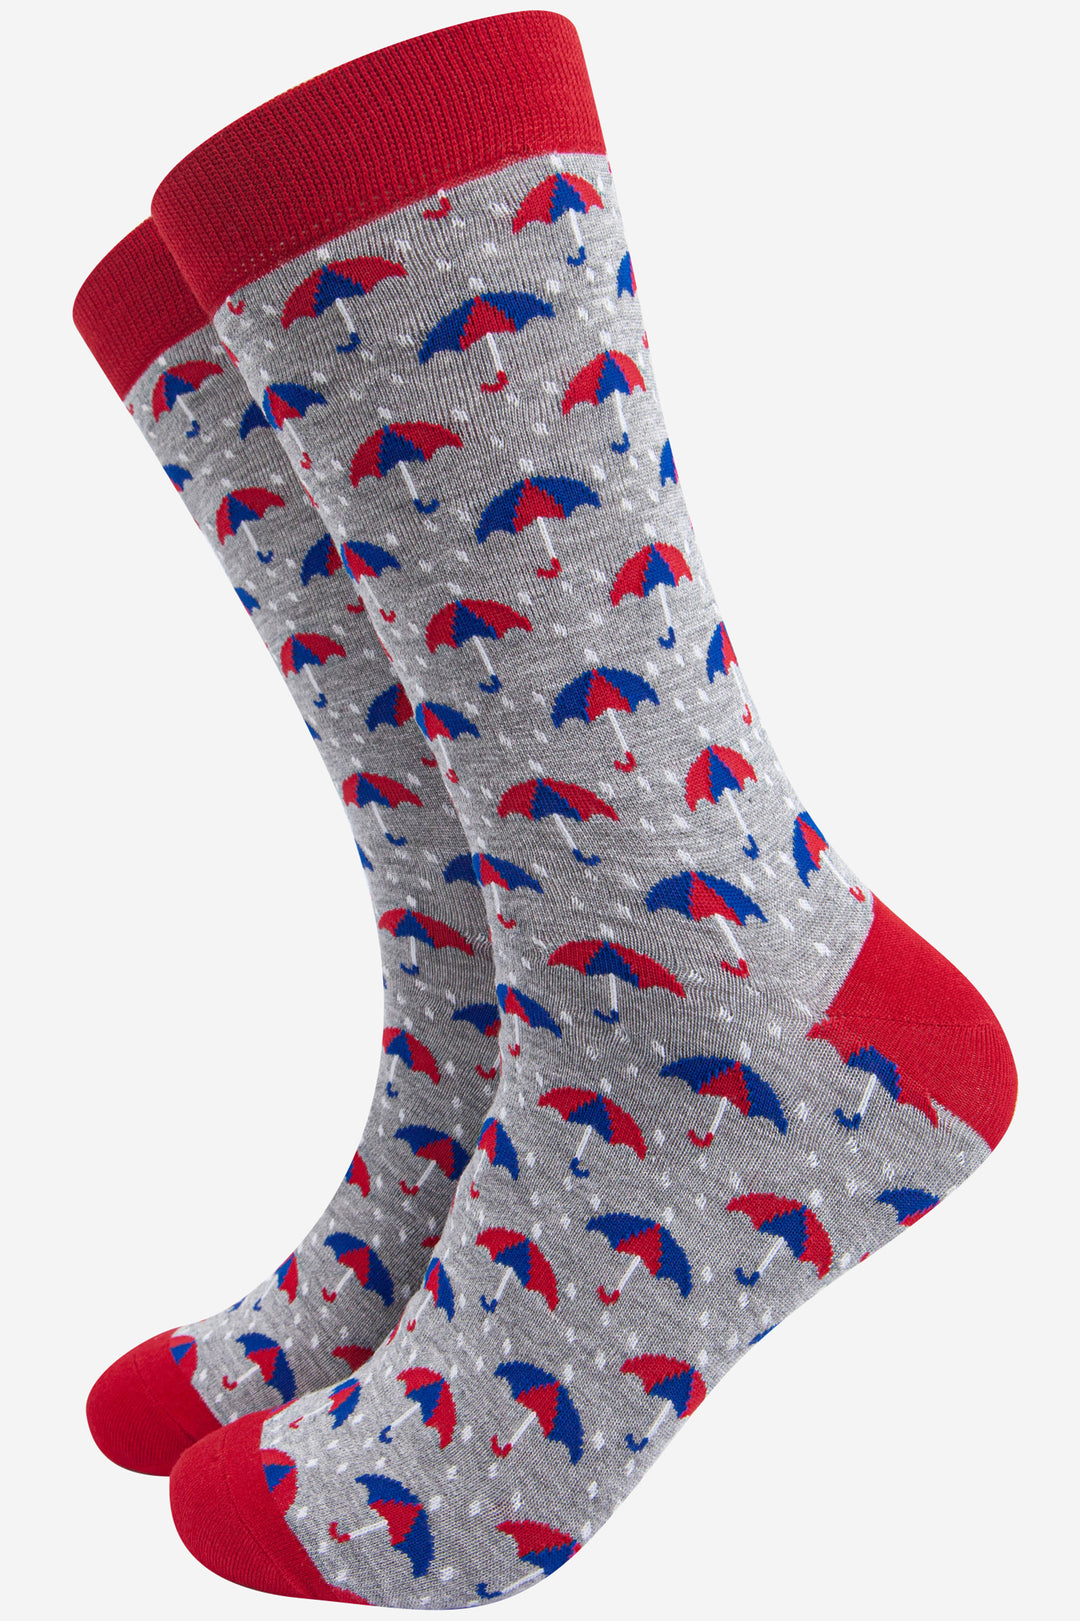 grey dress socks with red heel, toe and cuff with an all over pattern of red and blue umbrellas and white rain drops